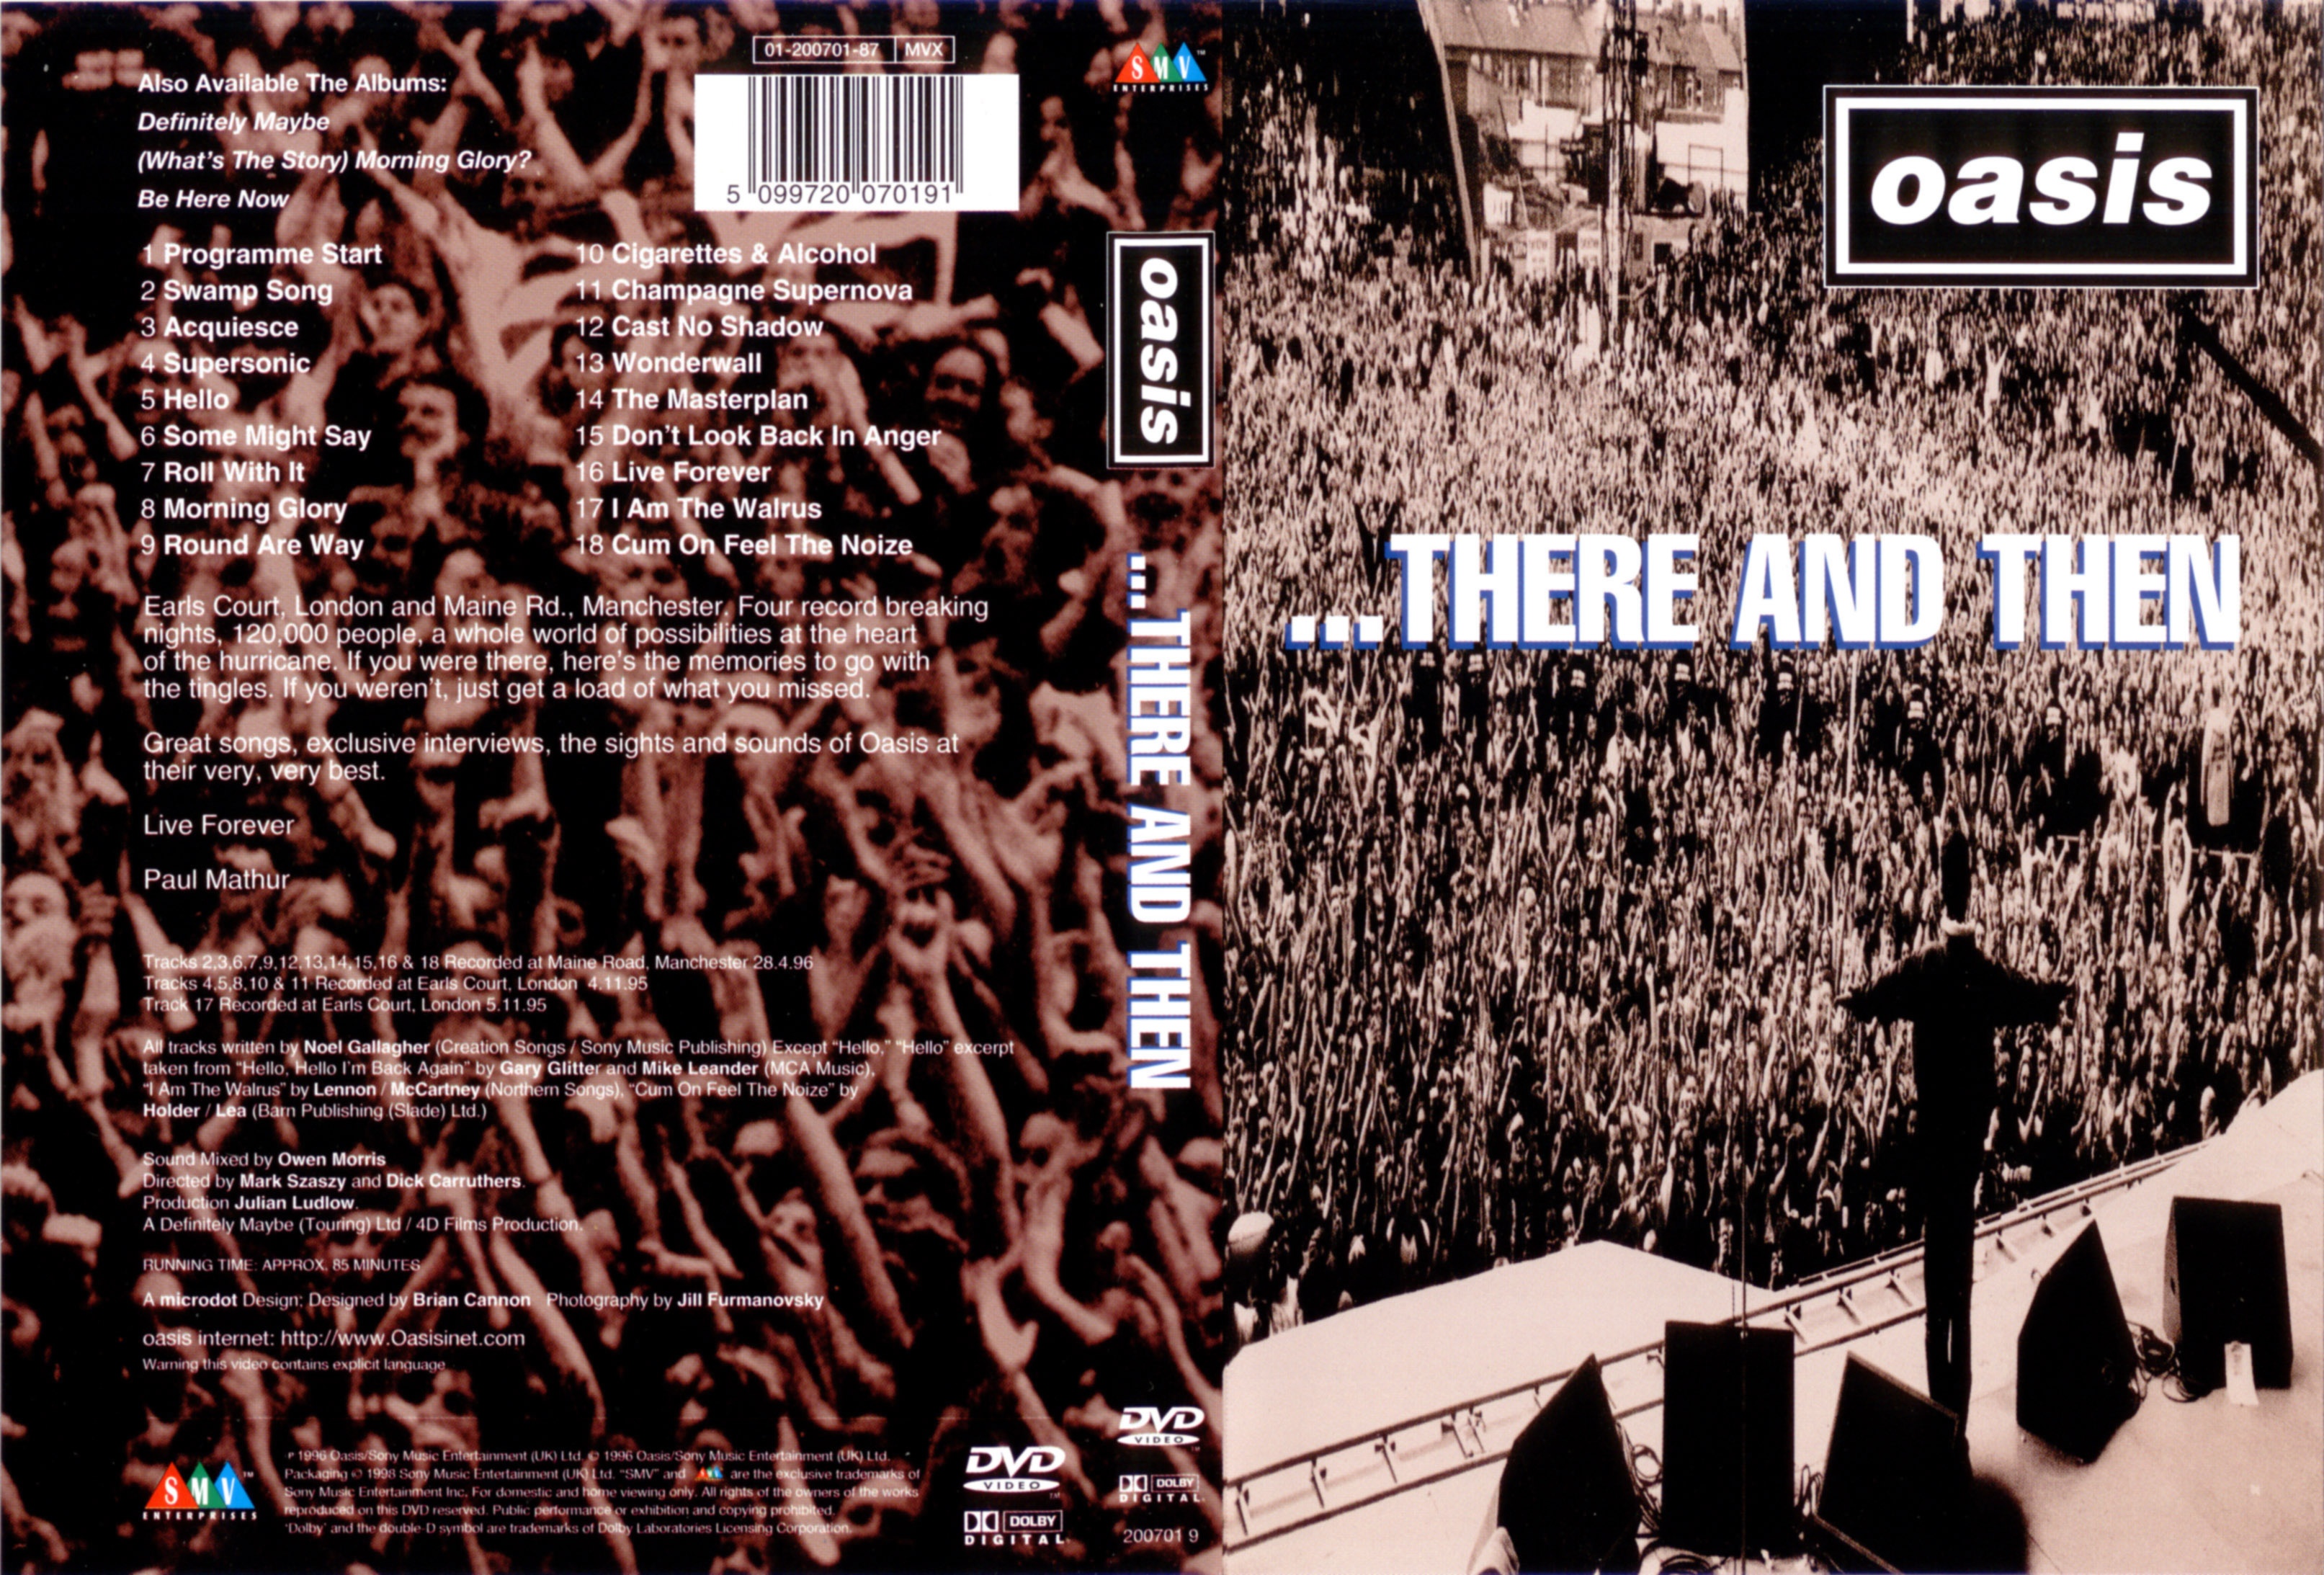 Jaquette DVD Oasis - there and then